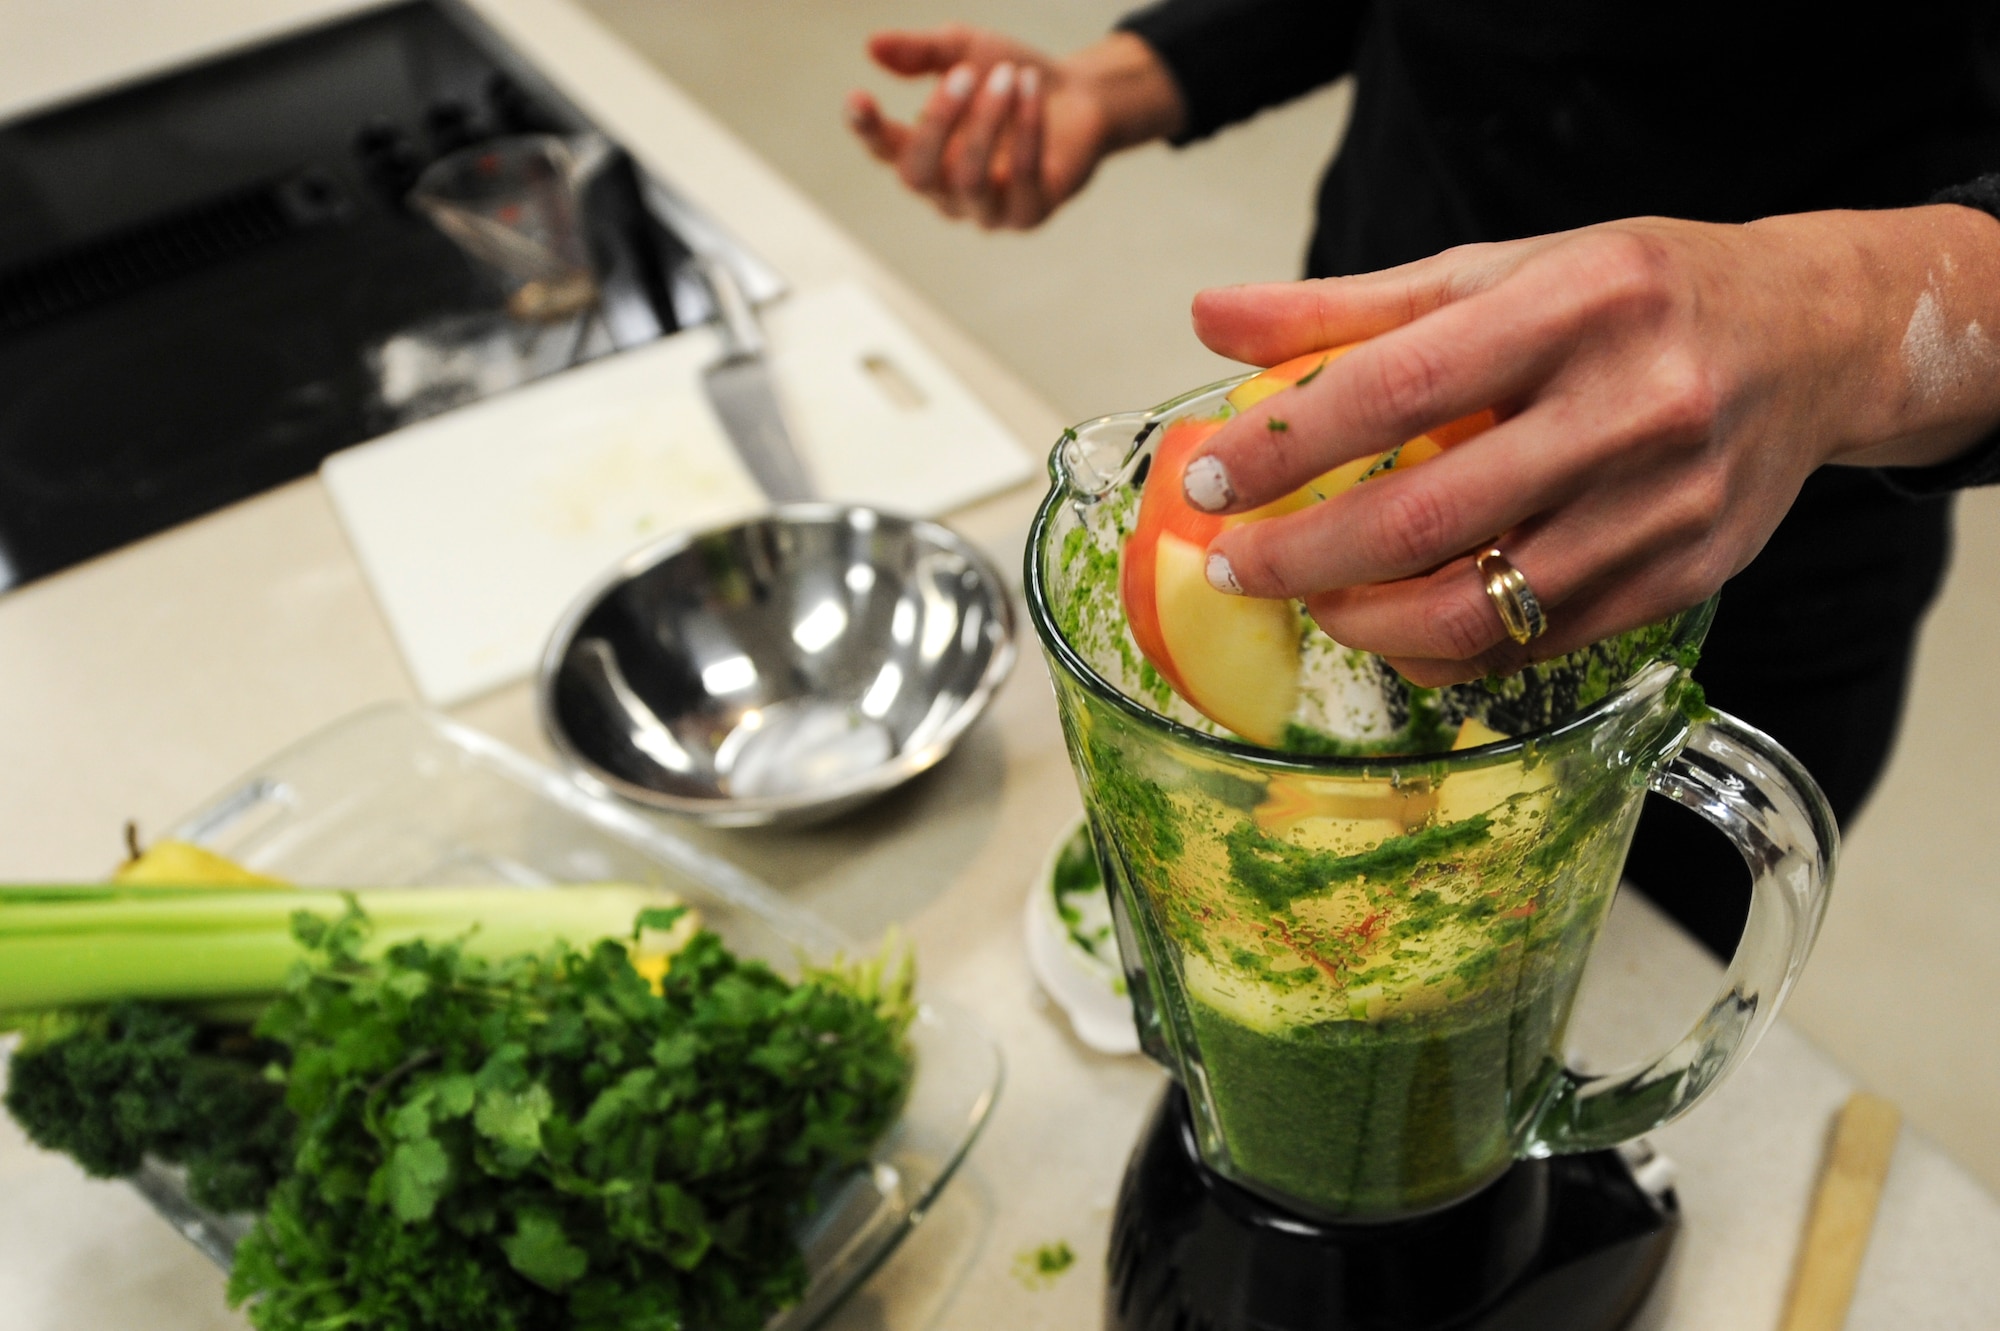 Angela Peralta, Buckley Health and Wellness Center registered dietitian, blends fruits and vegetables into a smoothie during a healthy cooking class Jan. 17, 2014, at the HAWC on Buckley Air Force Base, Colo. Peralta demonstrated to several Team Buckley members how to make healthy smoothies and pastries during the class. (U.S. Air Force photo by Airman Emily Amyotte/Released)